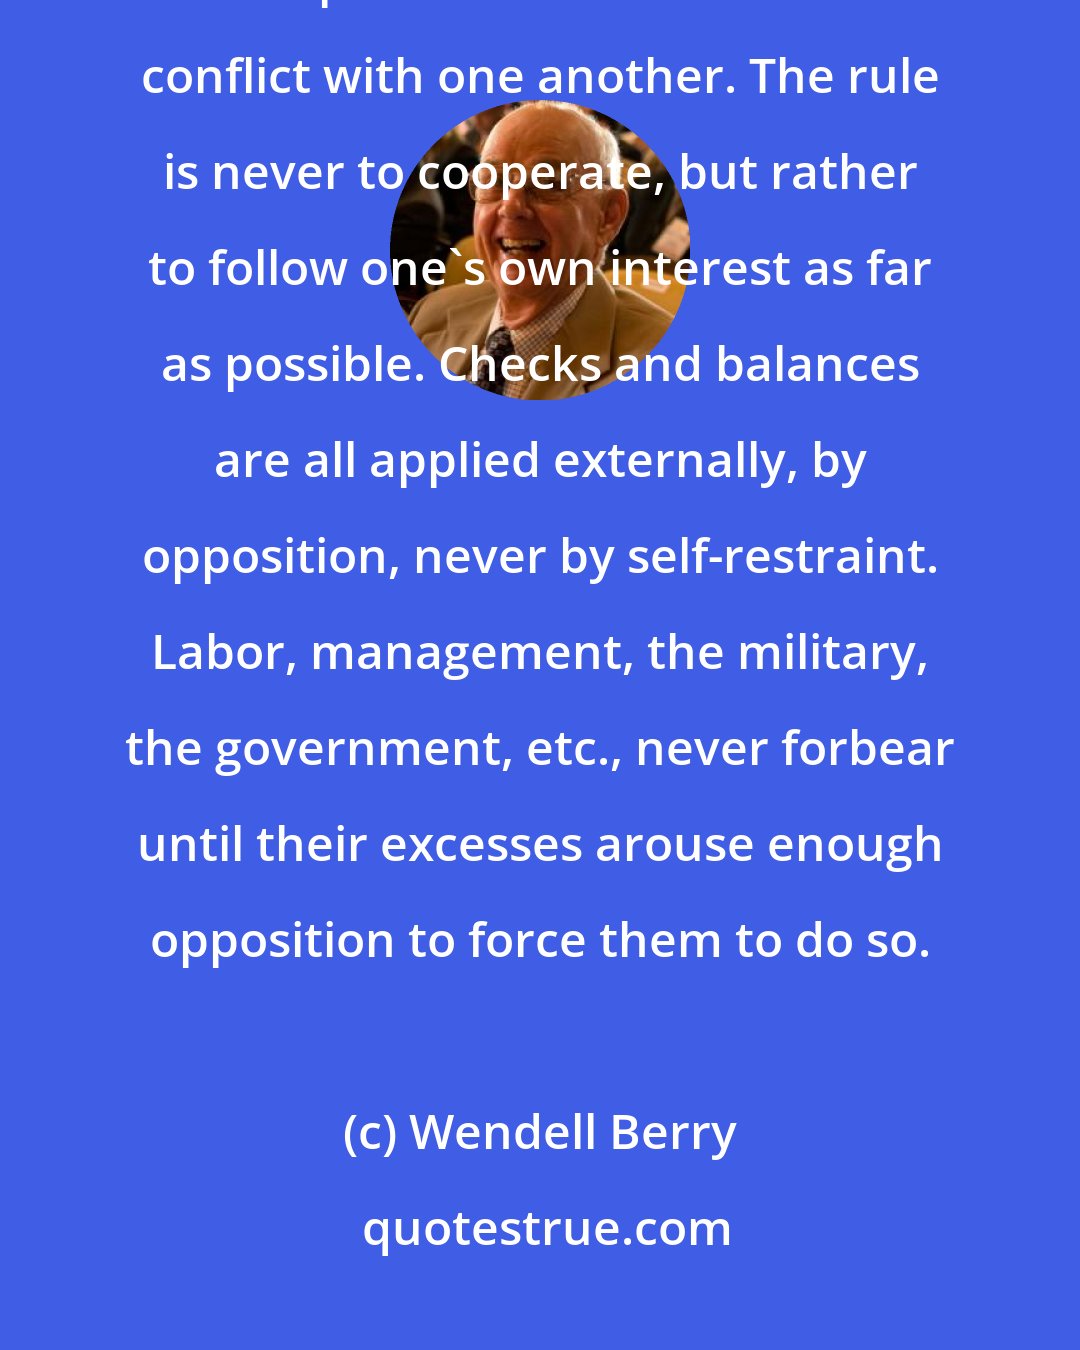 Wendell Berry: Because by definition they lack any sense of mutuality or wholeness, our specializations subsist on conflict with one another. The rule is never to cooperate, but rather to follow one's own interest as far as possible. Checks and balances are all applied externally, by opposition, never by self-restraint. Labor, management, the military, the government, etc., never forbear until their excesses arouse enough opposition to force them to do so.